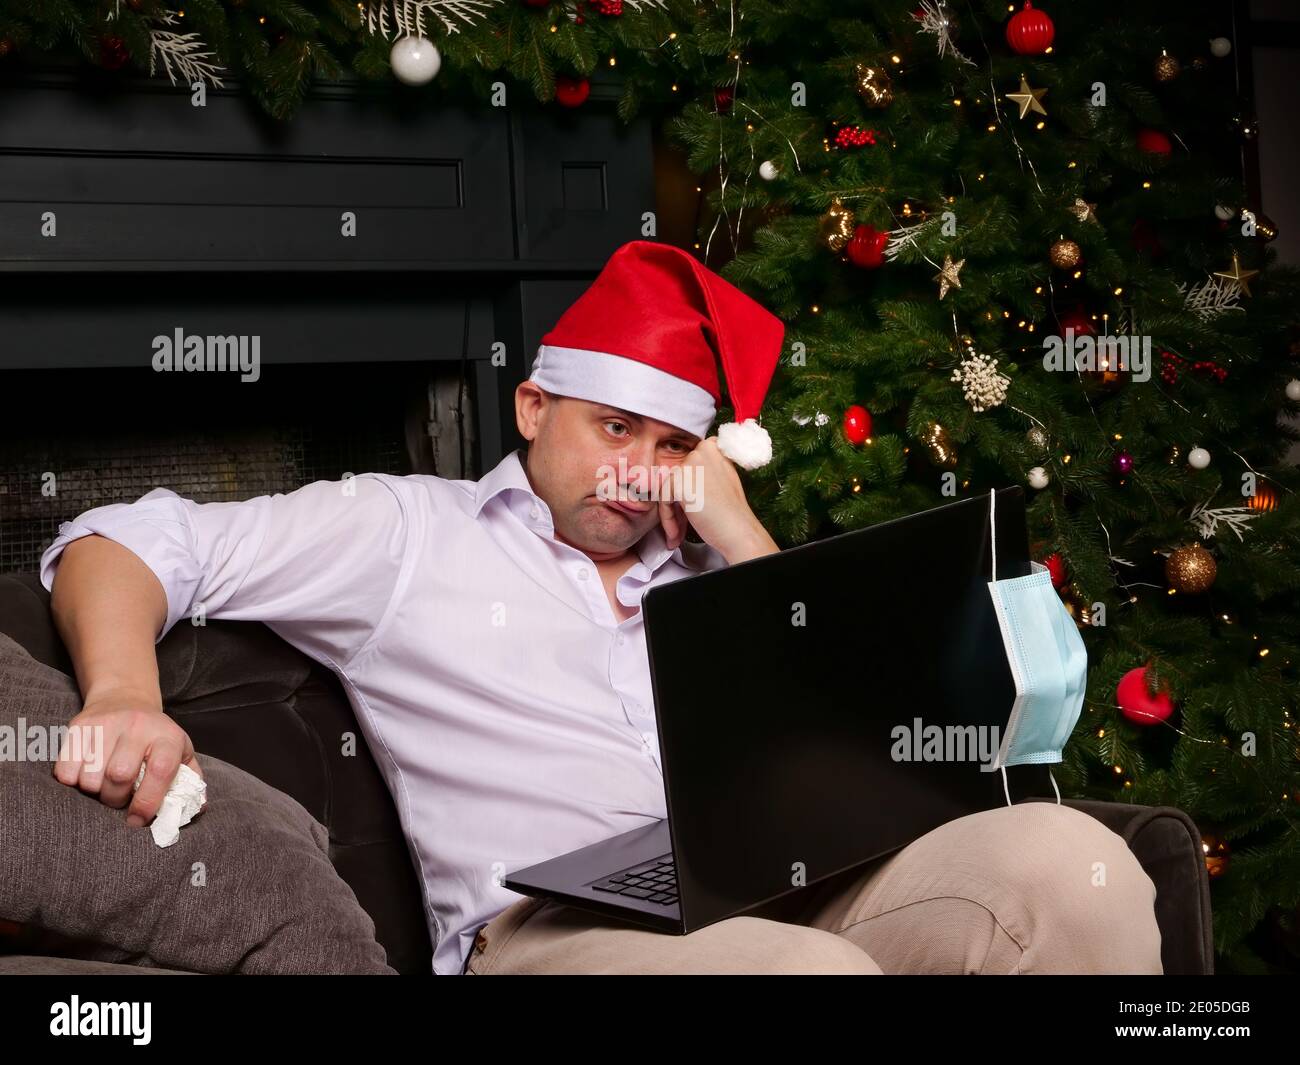 A sad sick man in a Santa hat is looking at a laptop alone. New Years celebration and covid epidemic. Stock Photo